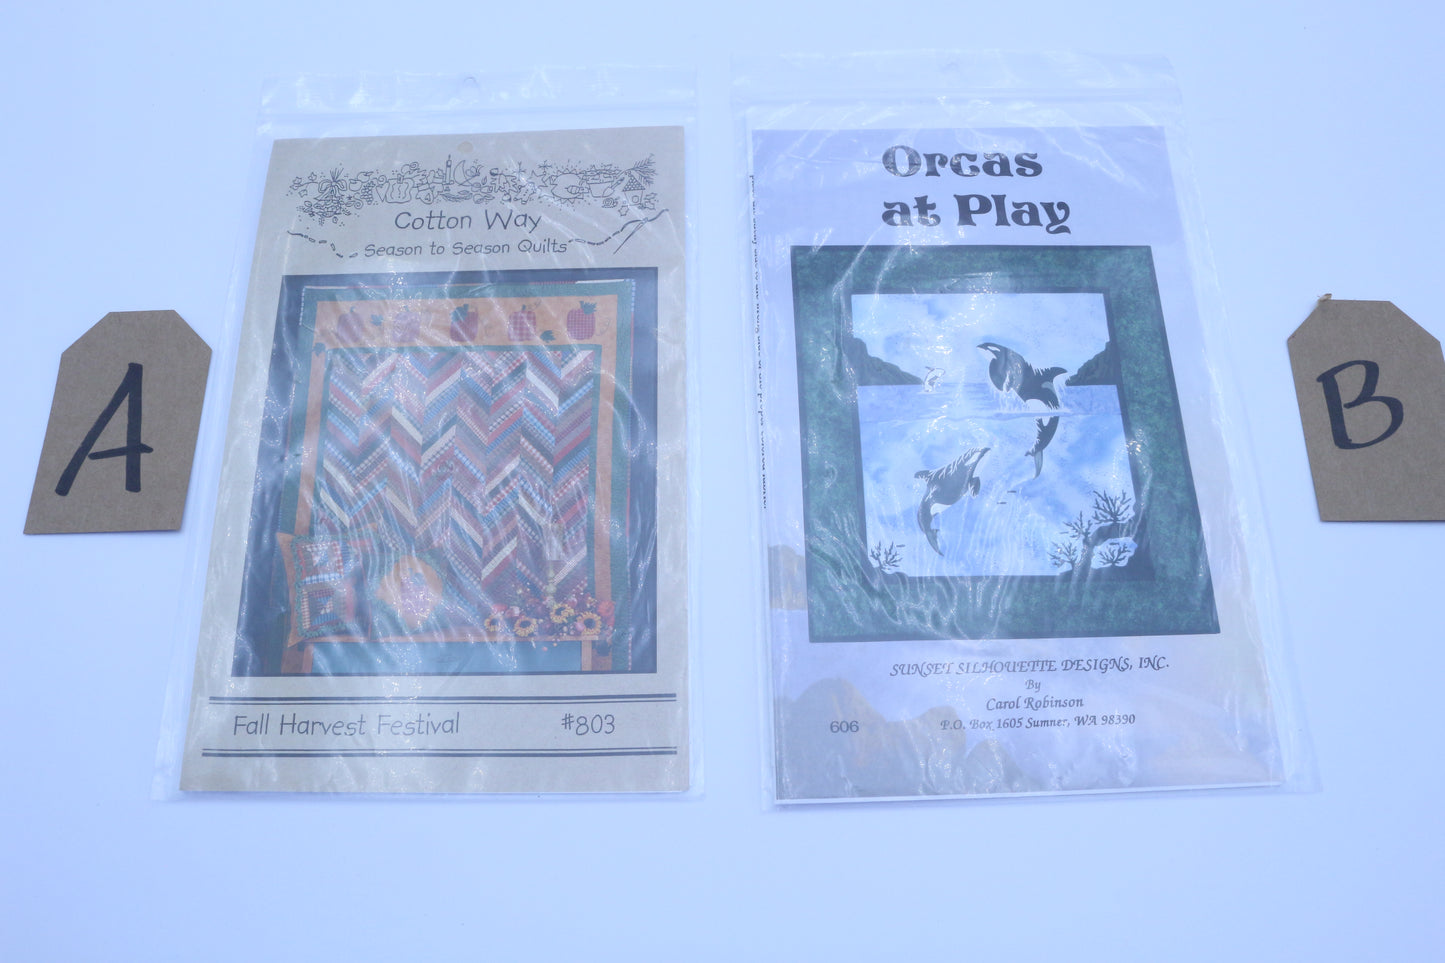 Cotton Way Season to Season Quilt Pattern or Orcas at Play Quilt Pattern PK152